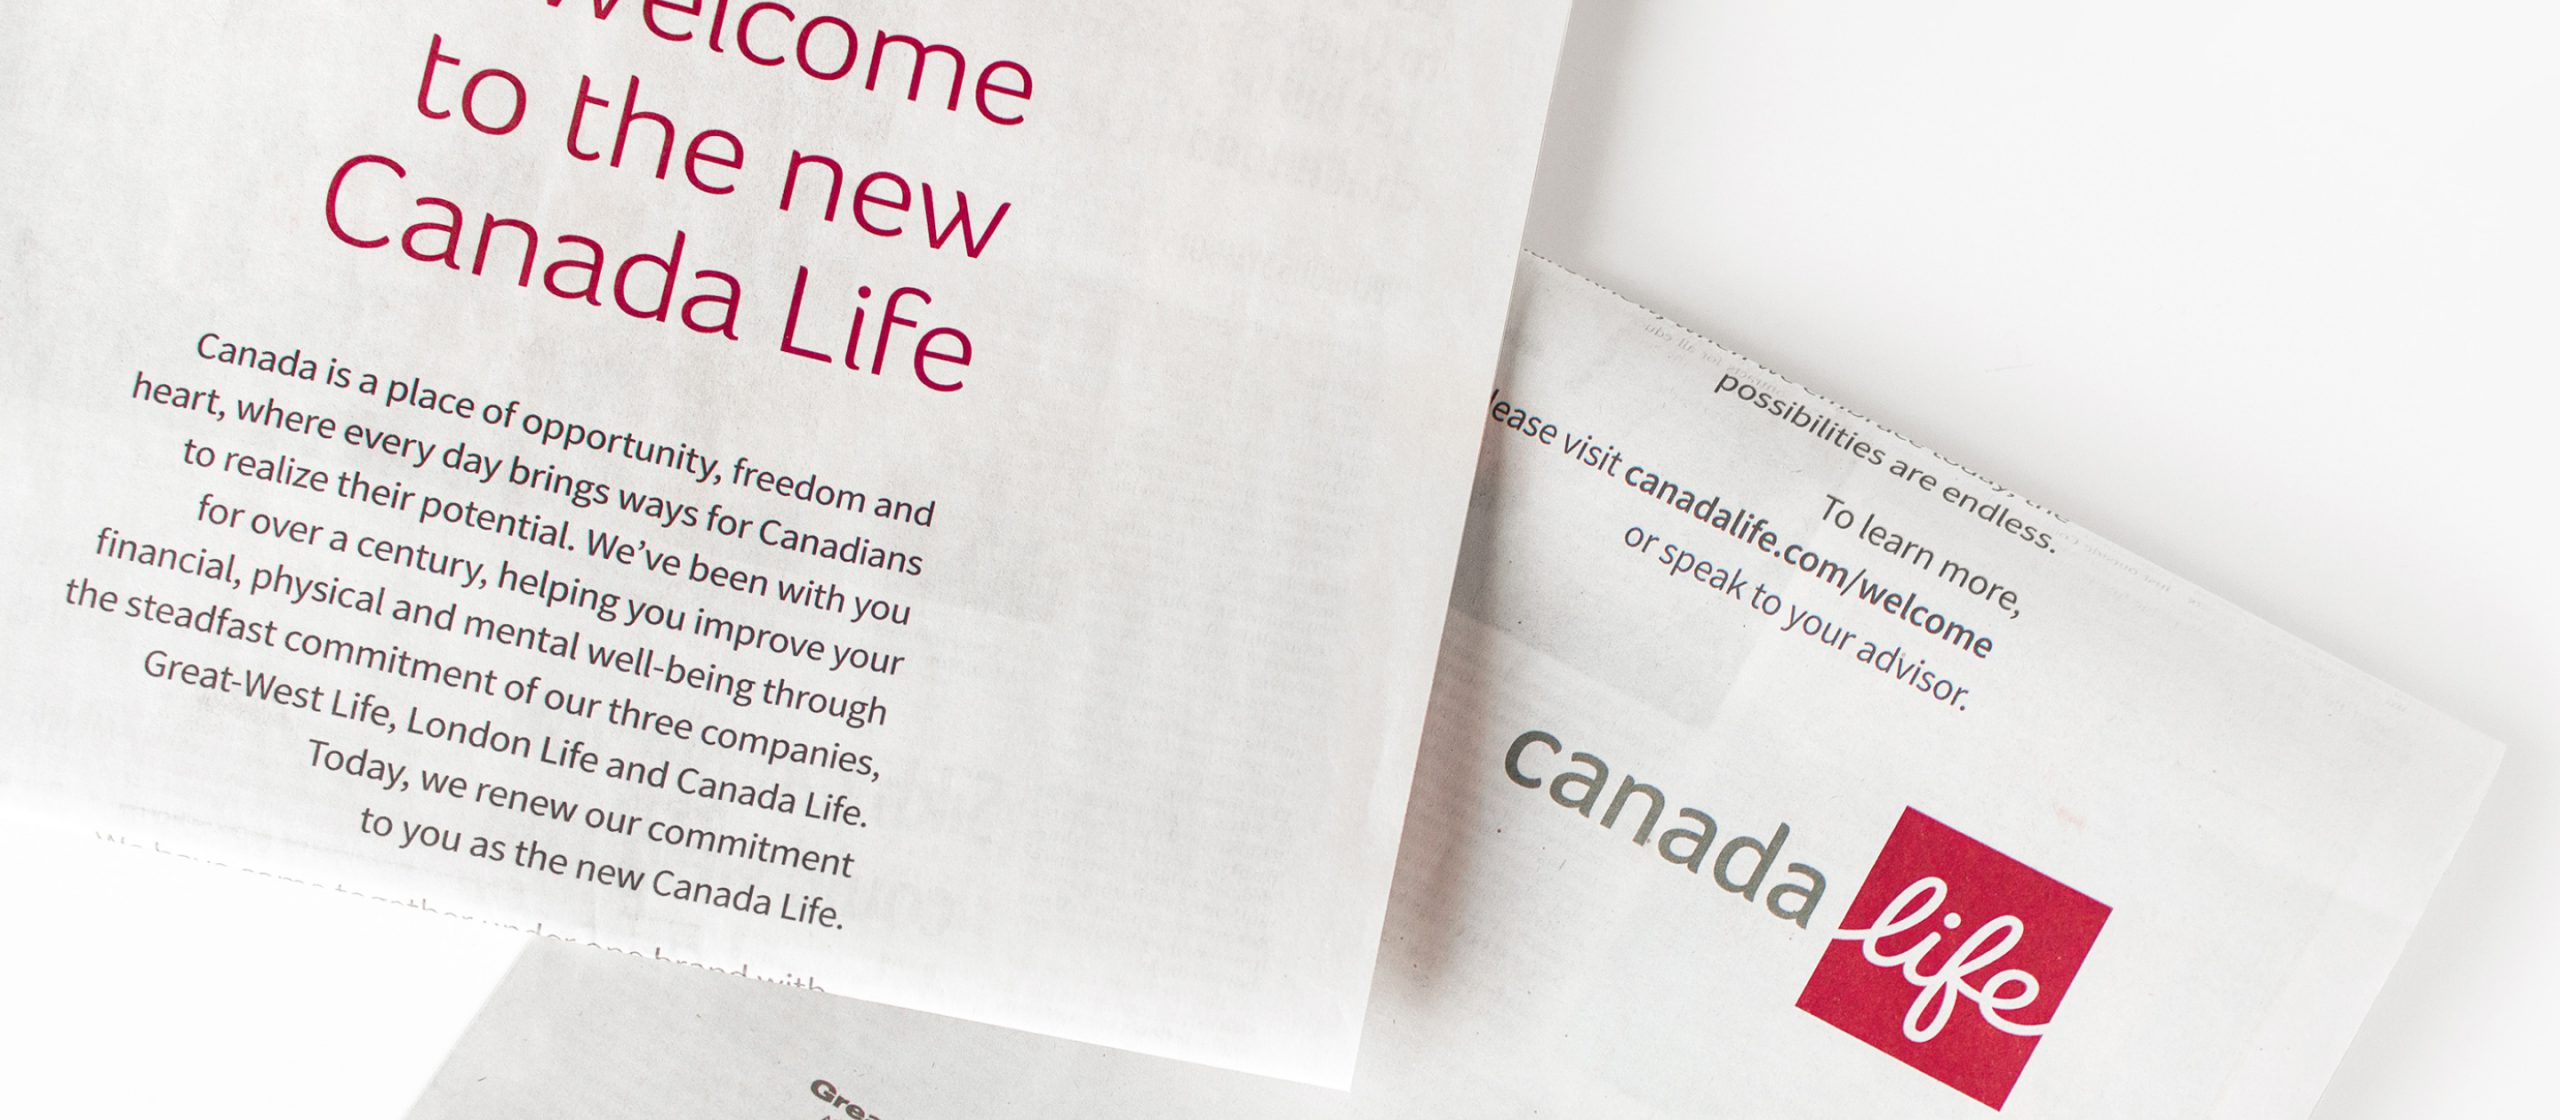 Full page ads in newsprint announcing the new Canada Life brand